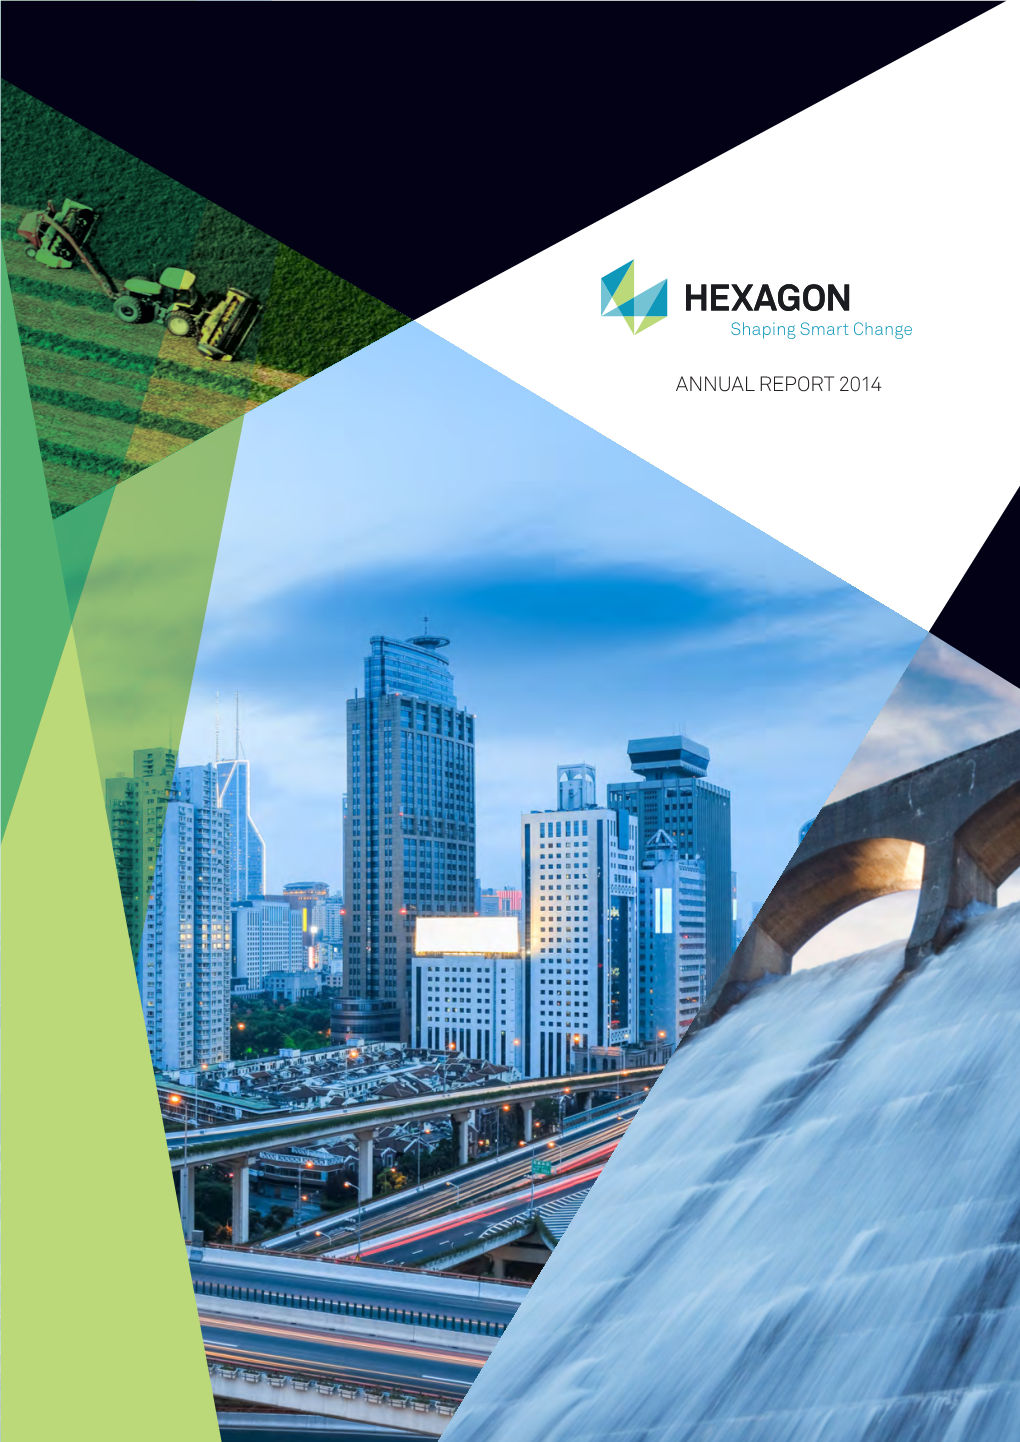 Hexagon Geosystems, to Have a Real-Time Assessment of All Activities Within the Intergraph SG&I and Hexagon Positioning)